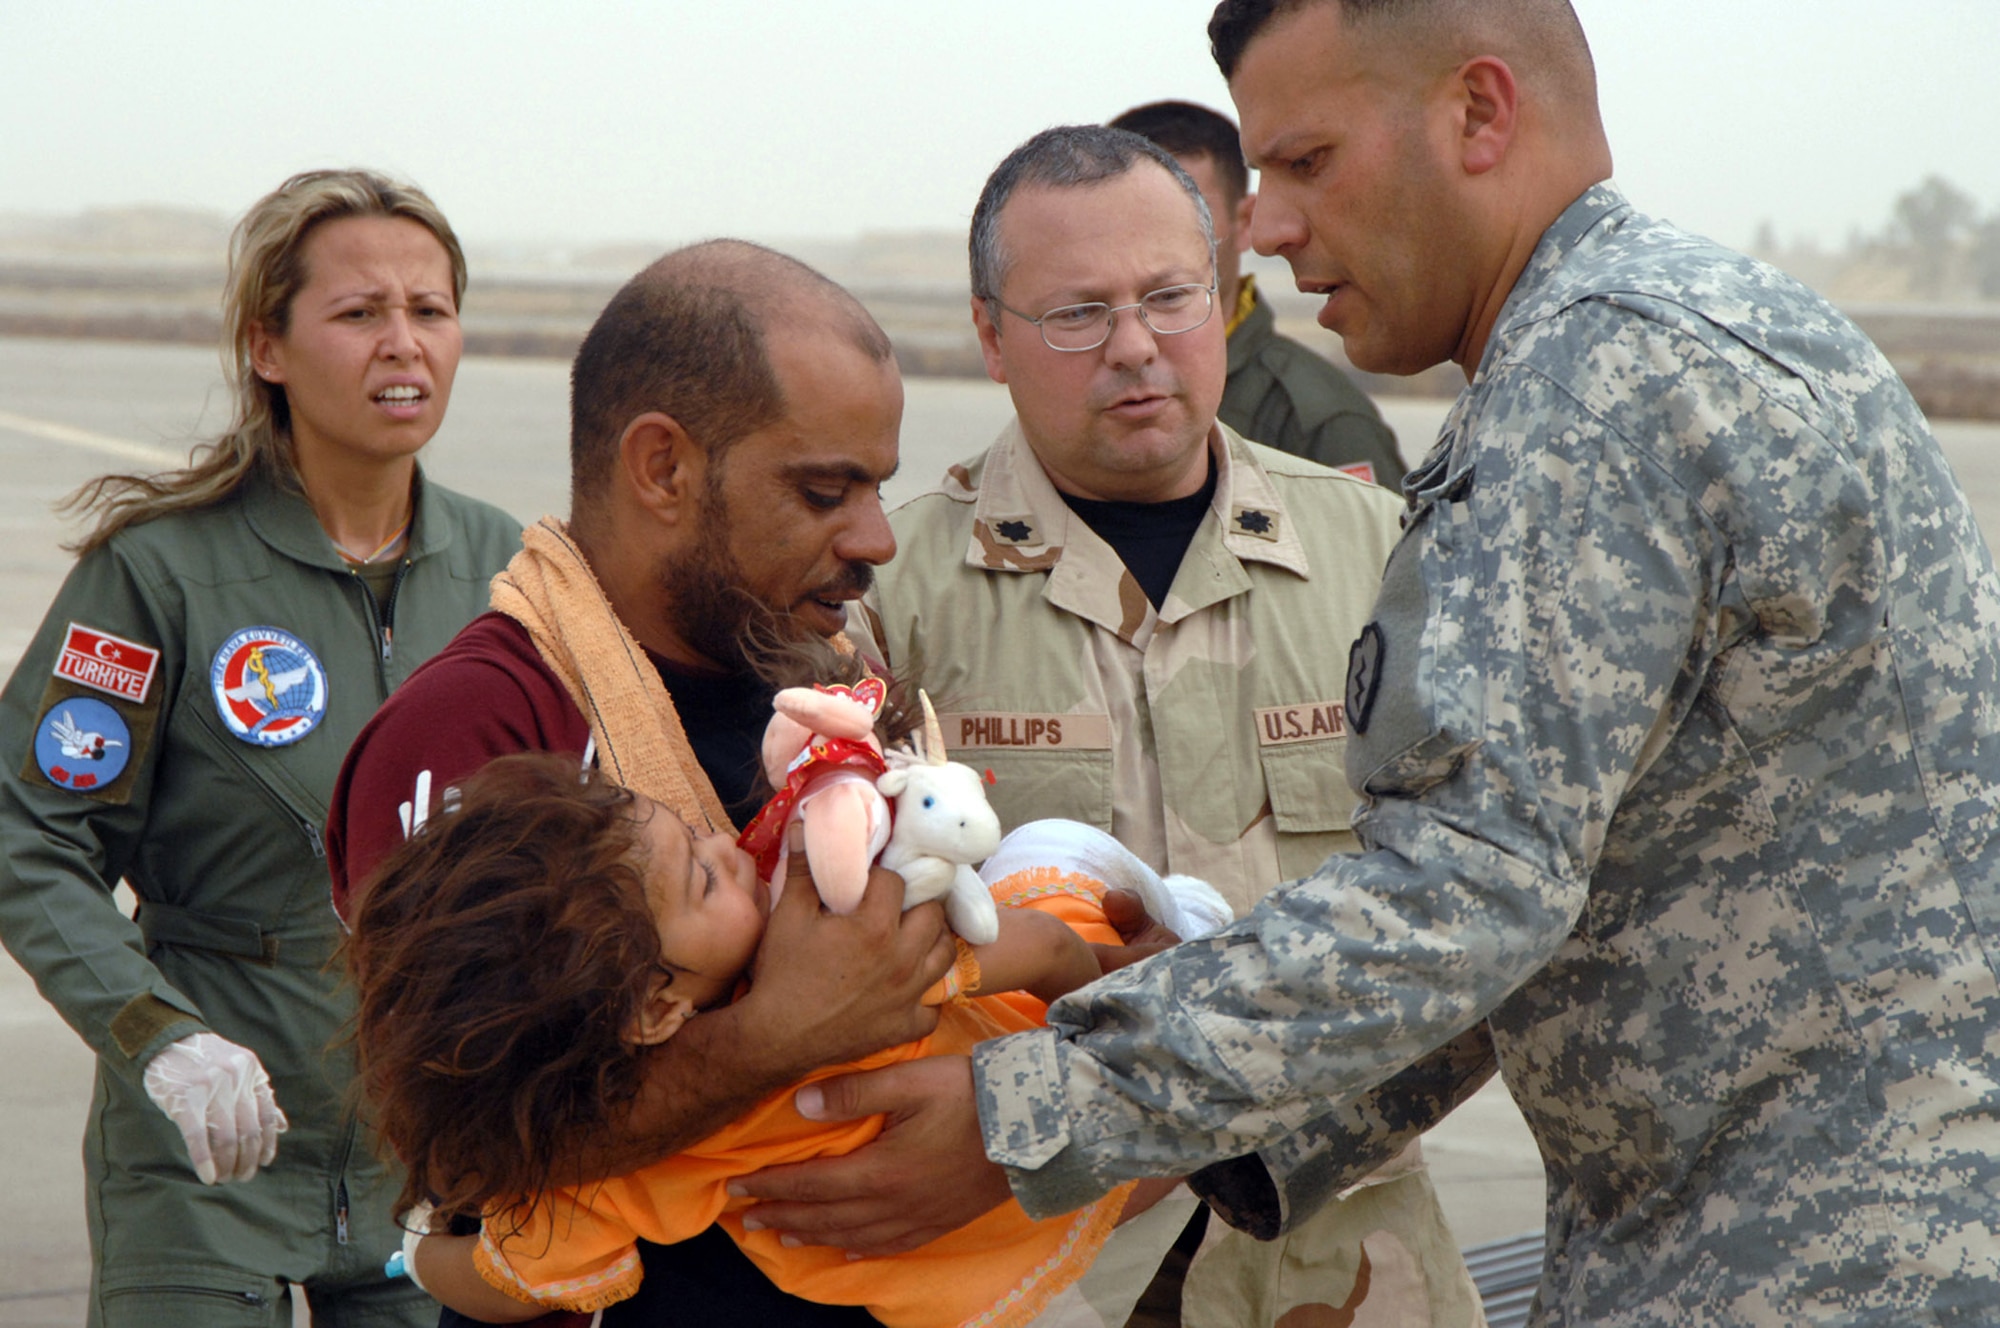 Lt. Col. (Dr.) Michael Phillips (center) and Army Sgt. Ramy Elmery (right) aid a man in transferring an injured girl to a Turkish medical aircraft while a Turkish air force medical team member looks on July 8 at Kirkuk Air Base, Iraq. The girl was hurt in the July 7 market bombing in Tuz Khurmato, Iraq. Colonel Phillips is assigned to the 506th Expeditionary Medical Squadron. Sergeant Elmery is assigned to the 3rd Infantry Brigade Combat Team, Headquarters Headquarters Company. Airmen from the 506th Air Expeditionary Group worked with Iraqi medical providers and Turkish army and air force members to receive, transfer and aerovac almost 30 injured Turkmen civilians and family members to the Turkish capital city of Ankara for further treatment. (U.S. Air Force photo/Senior Airman Kristin Ruleau) 
